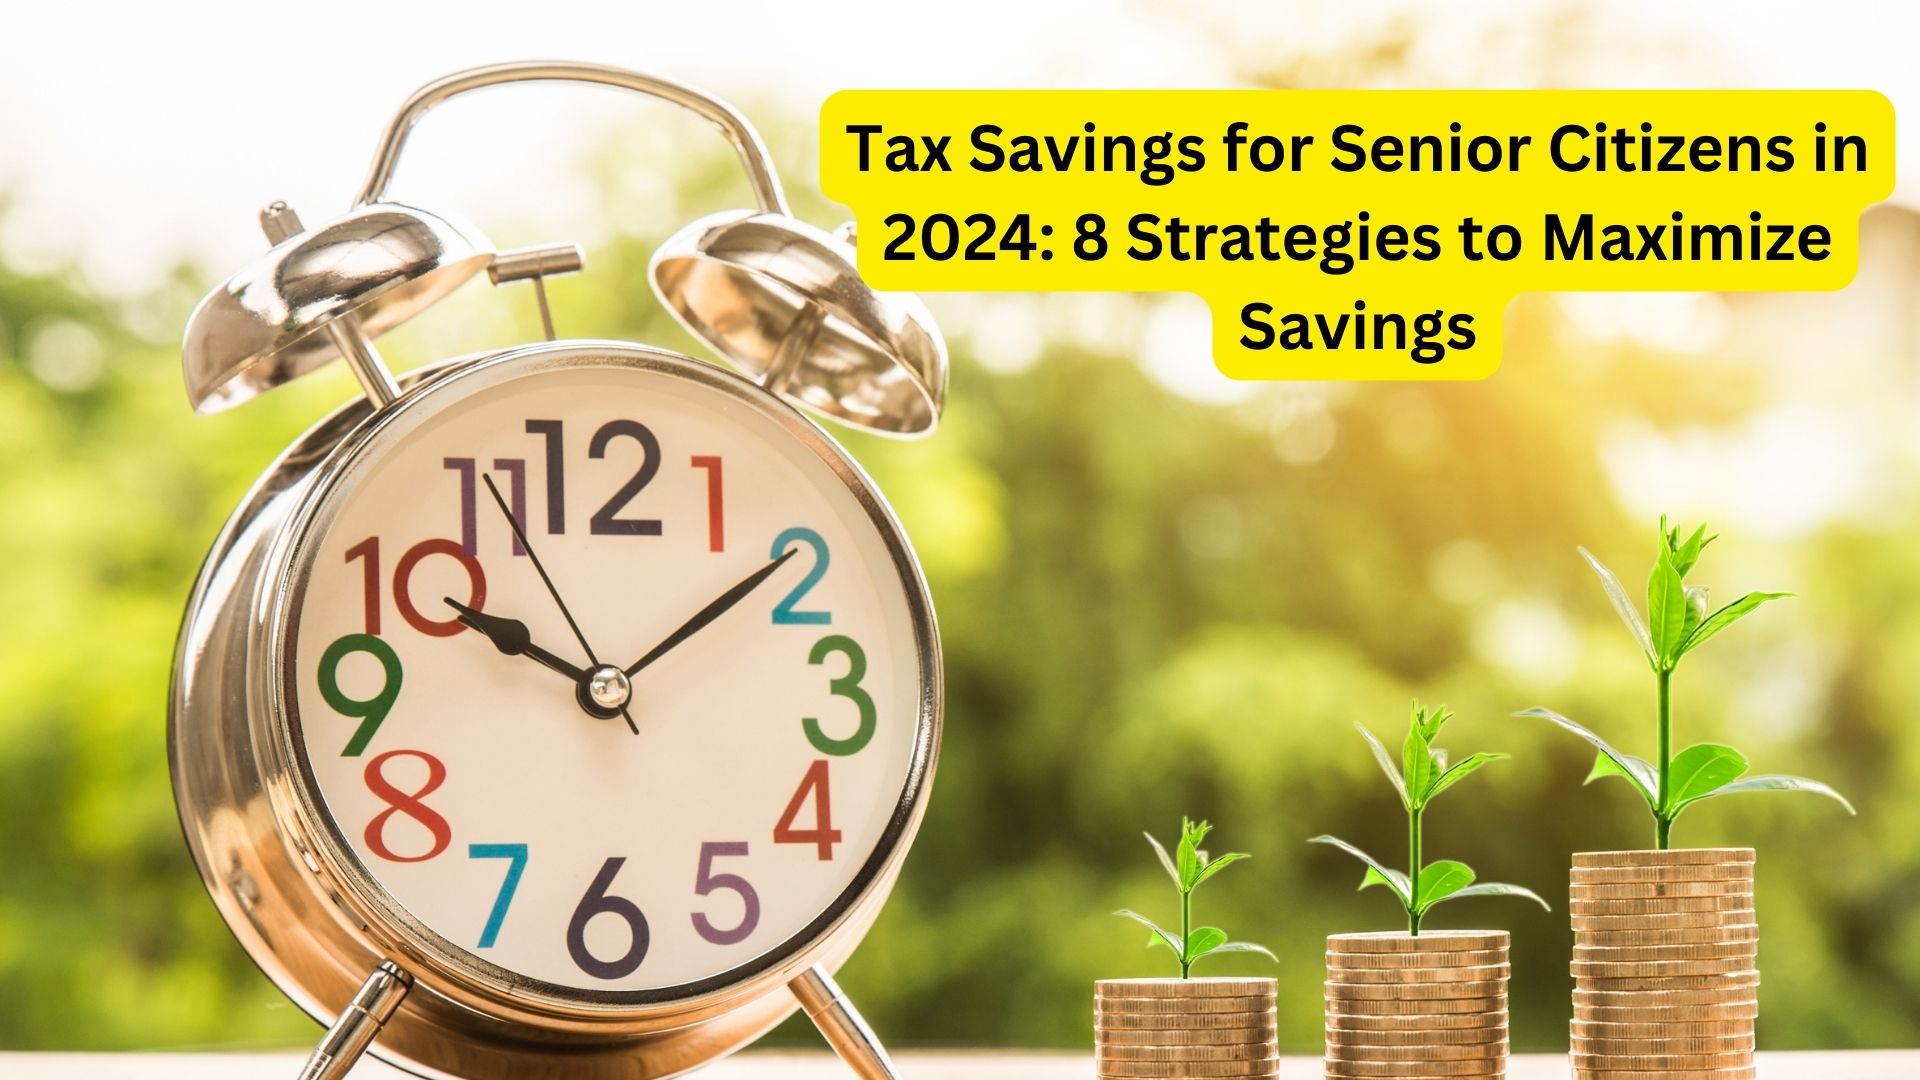 Tax Savings for Senior Citizens in 2024: 8 Strategies to Maximize Savings